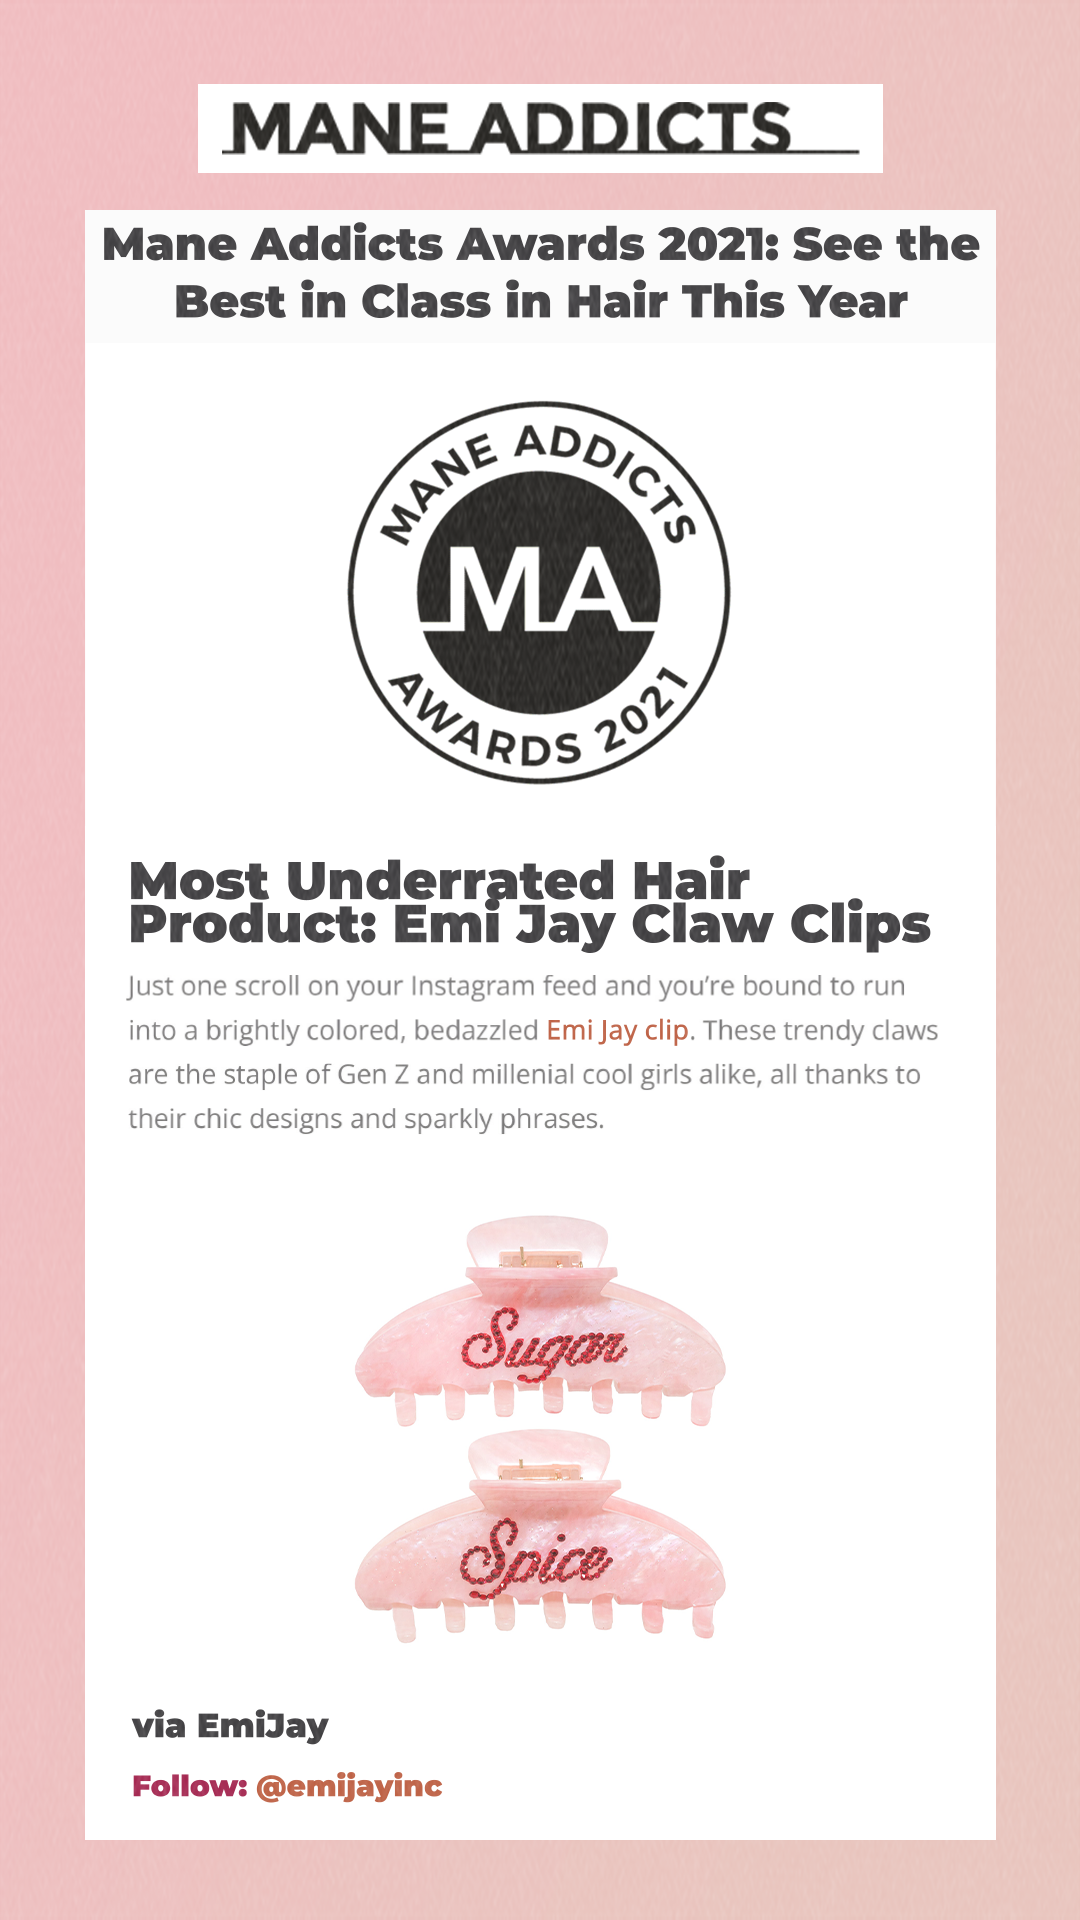 Mane Addicts Awards 2021: See the Best in Class in Hair This Year Most Underrated Hair Product: Emi Jay Claw Clips Just one scroll on your Instagram feed and you’re bound to run into a brightly colored, bedazzled Emi Jay clip. These trendy claws are the staple of Gen Z and millenial cool girls alike, all thanks to their chic designs and sparkly phrases.